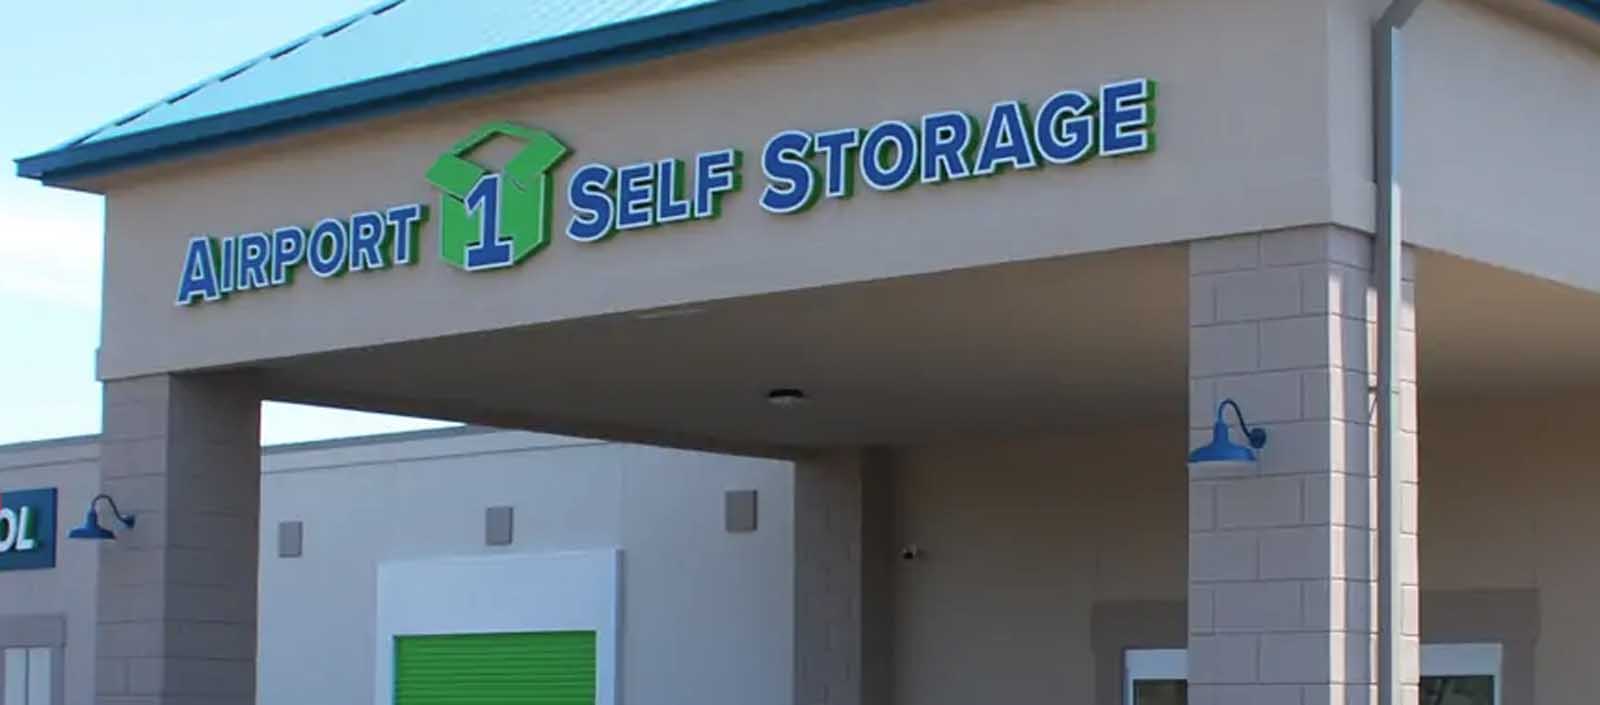 Airport 1 Self Storage Holds Grand Opening Event For Addition